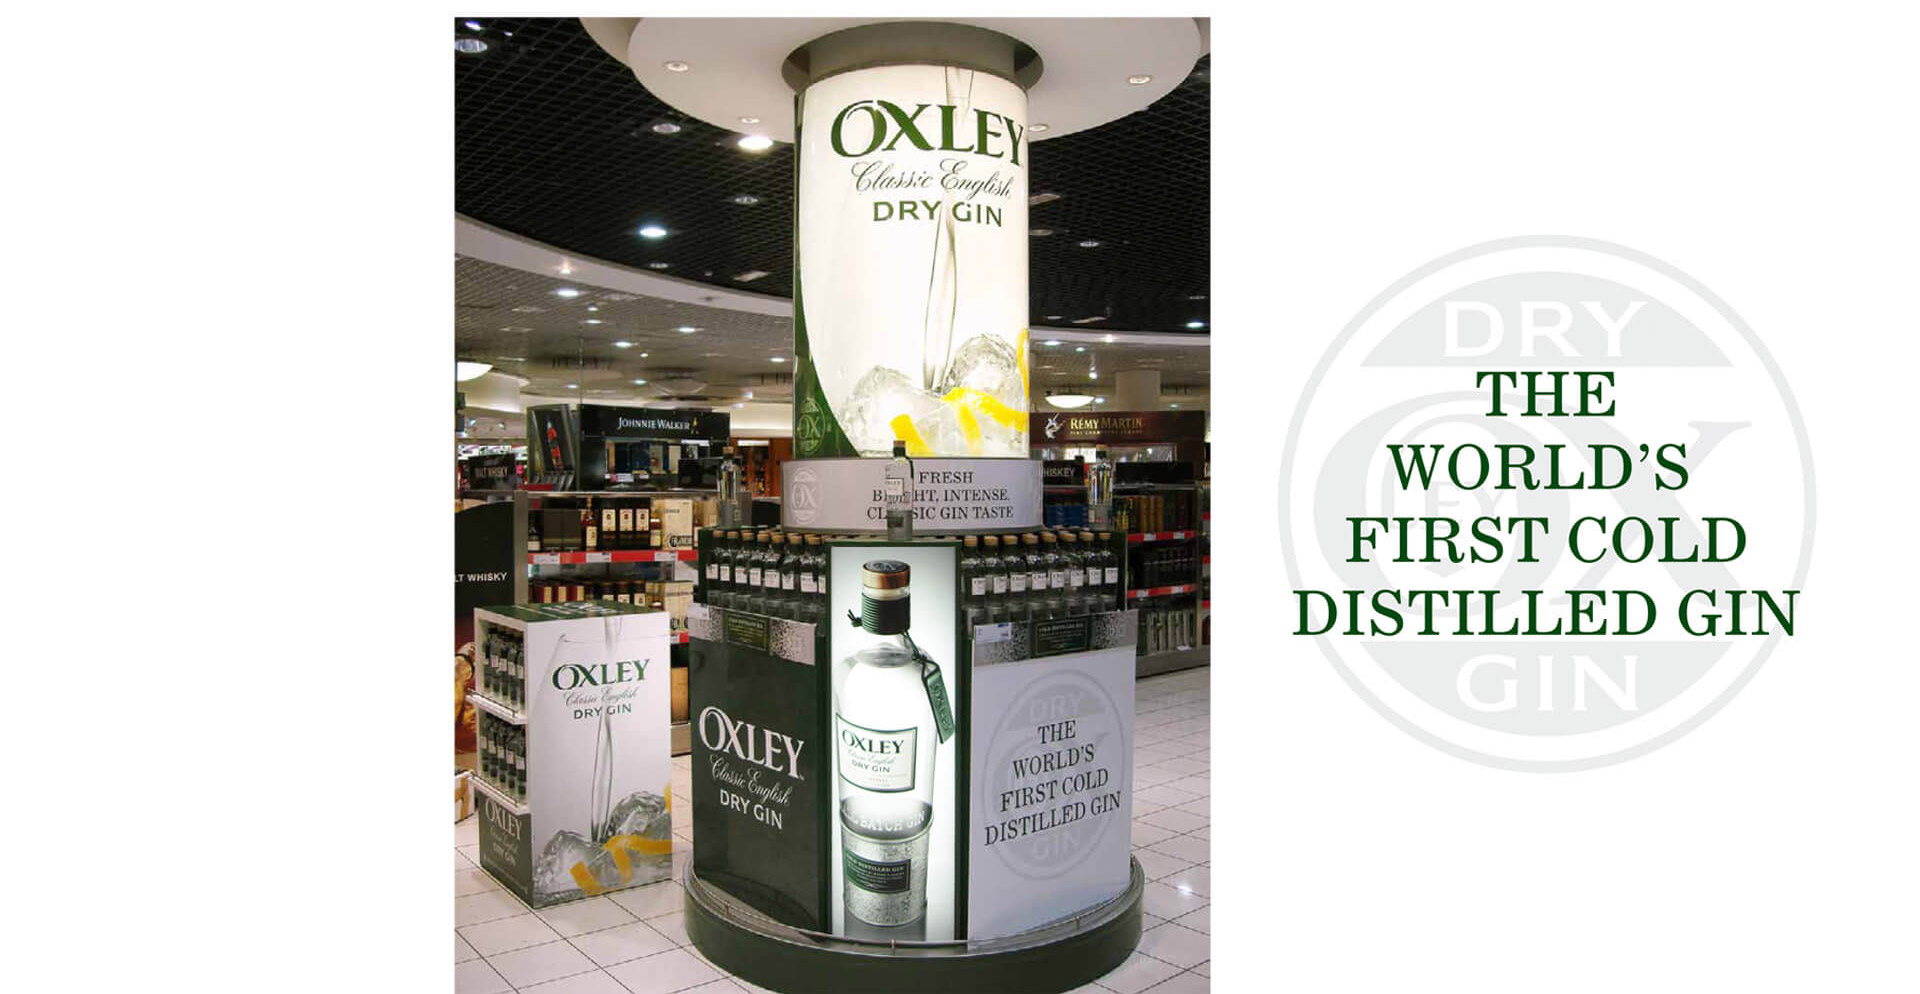 Oxley Gin Heathrow Terminal 3 branding and merchandising promotion campaign travel retail for Bacardi Global Travel Retail